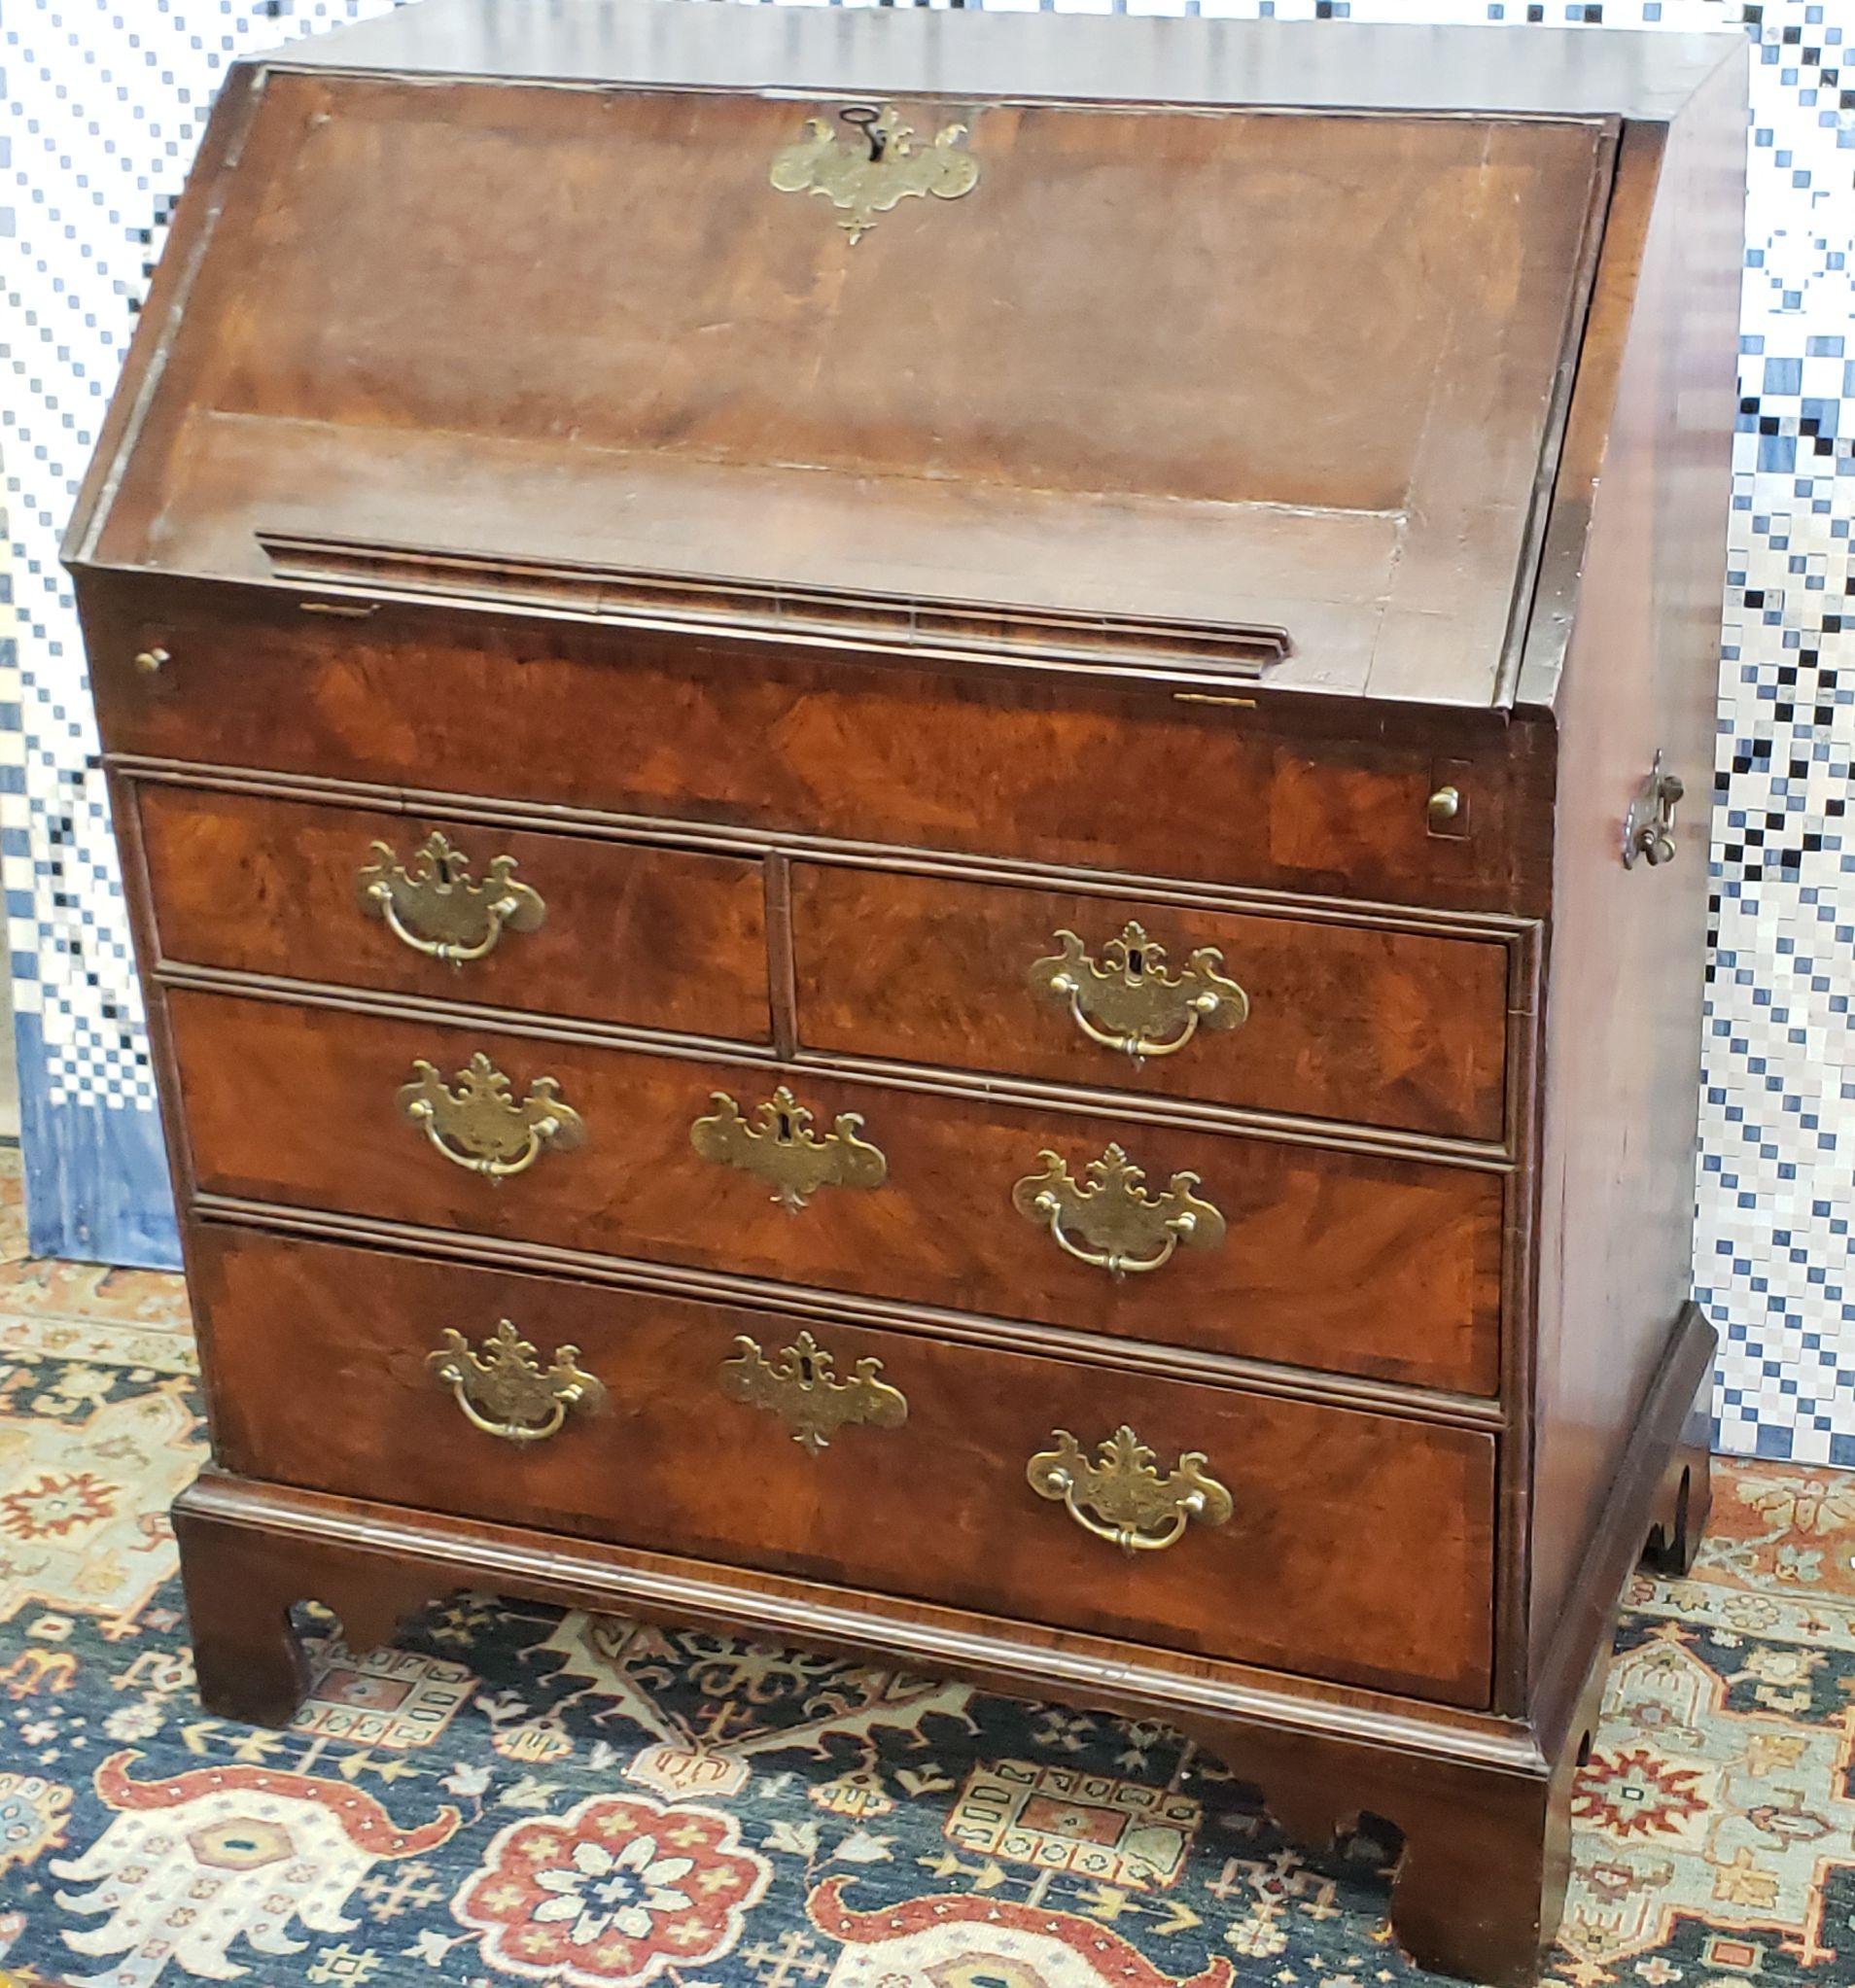 An early 18th century William and Mary Burled walnut veneer desk with book rest and side handles for transport. Pulls were replaced early on as styles changed and are early 18th century nice engraved handmade pulls.
  